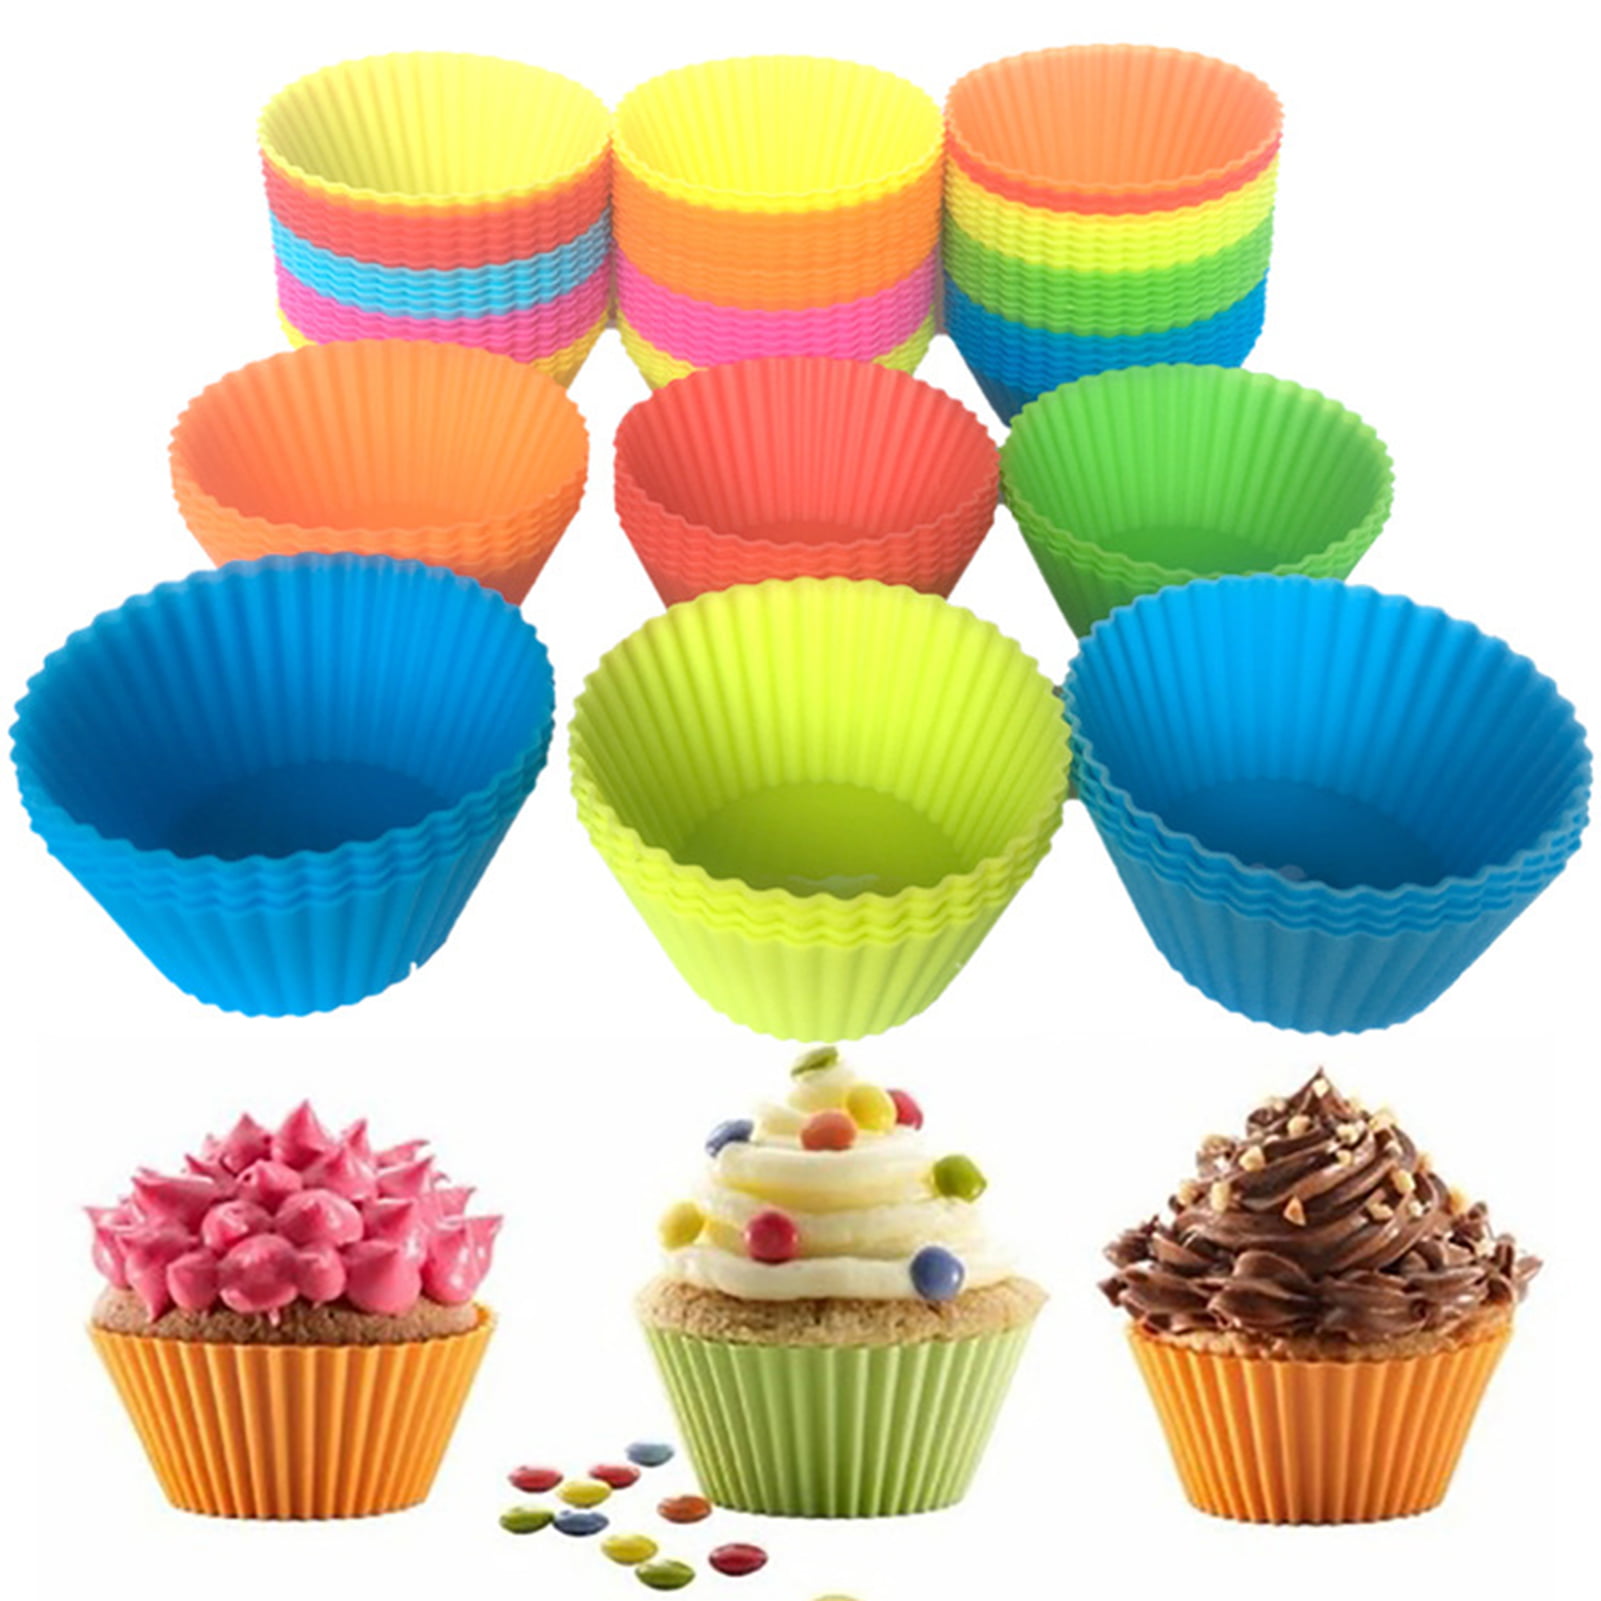 Details about   12 pcs Silicone Cake Muffin Chocolate Cupcake Liner Baking Cup Cookie Mold G 